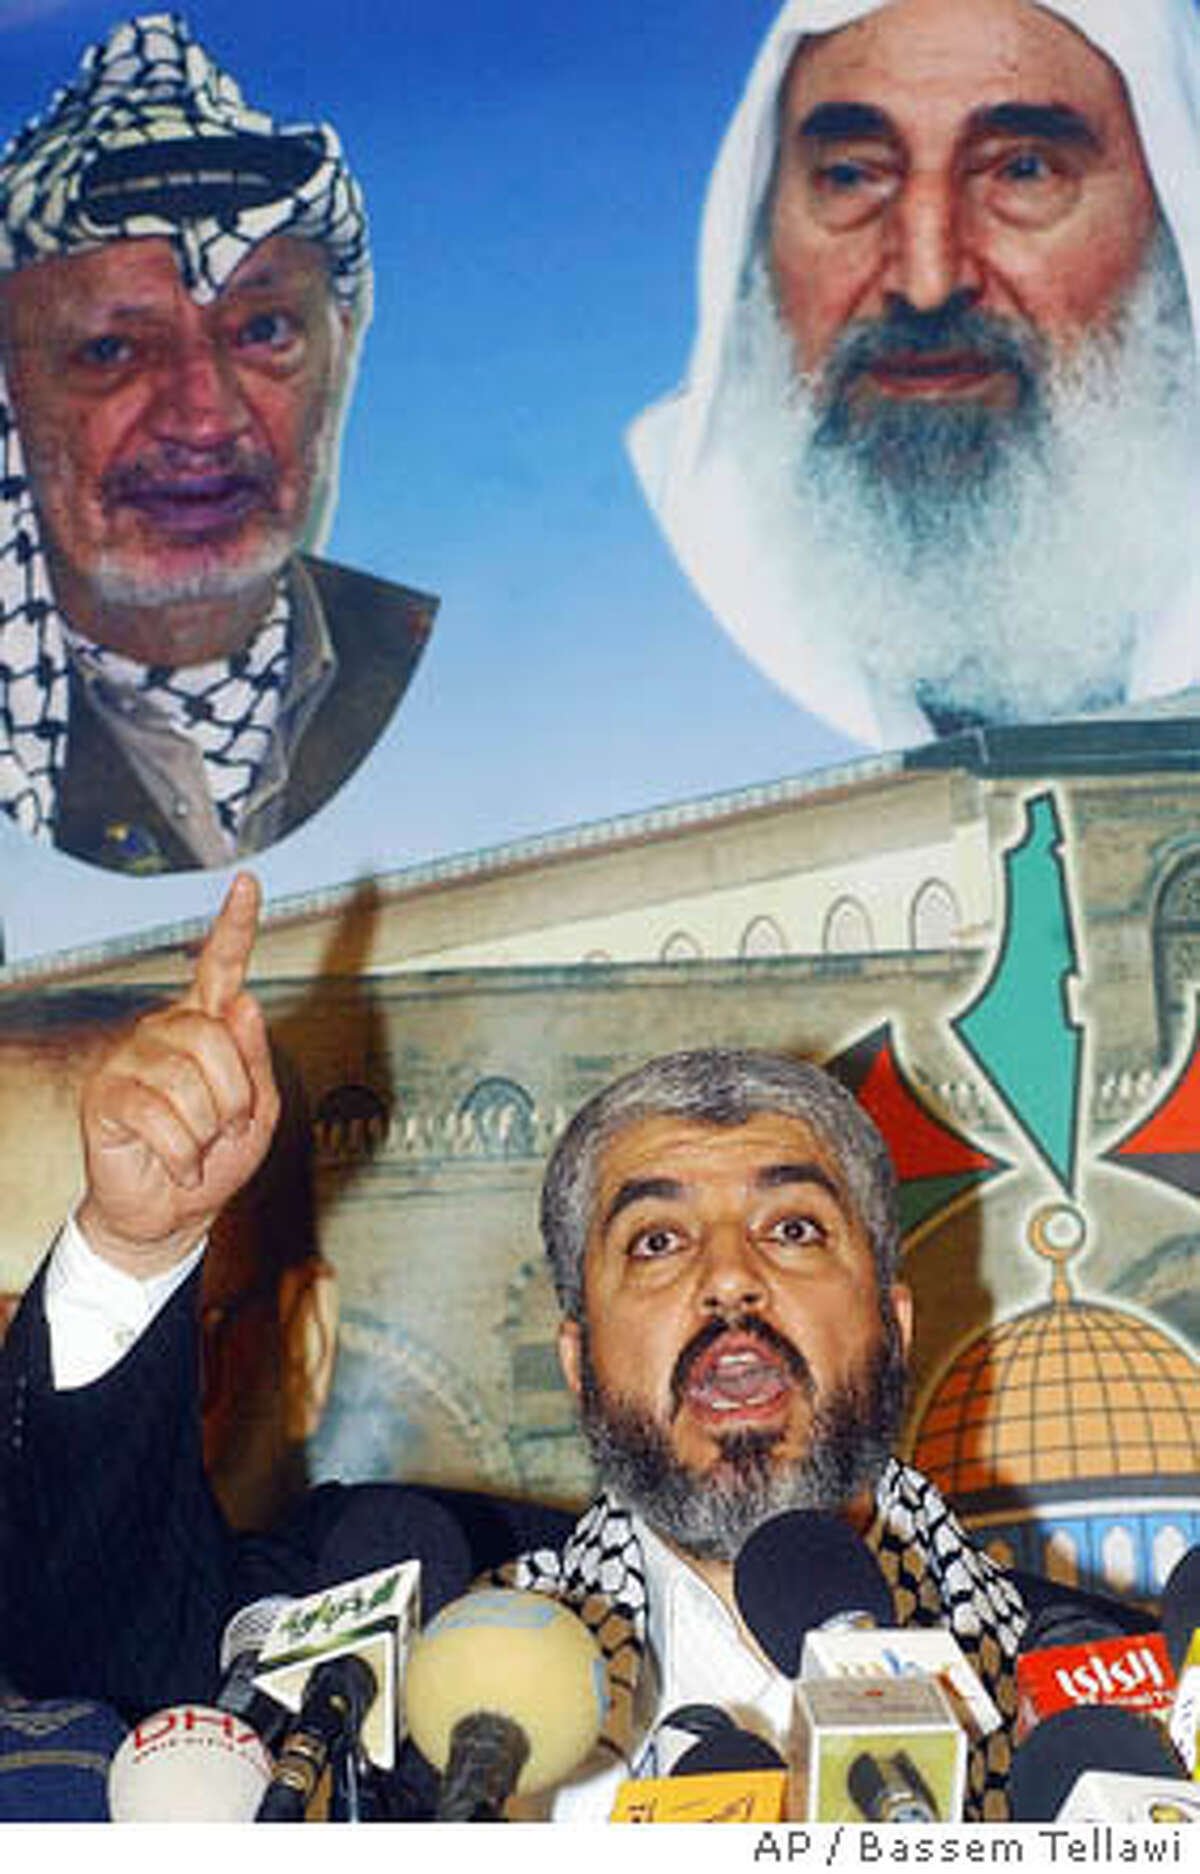 Hamas political leader Khaled Mashaal, whose group achieved a resounding victory in Palestinian elections this week, speaks at a news conference in Damascus, Syria Saturday, Jan. 28, 2006 saying that his group still wanted a partnership with other Palestinian factions and called for the world to respect the radical organization's landslide victory in parliamentary elections. Speaking to reporters from his base in Damascus, the Syrian capital, Khaled Mashaal outlined three goals: Reform of the Palestinian authority, sustaining its resistance to Israel and "arranging the Palestinian home." The Hamas chief also obliquely refused to disarm. Seen in poster in background, are images of the late PLO leader Yasser Arafat, and Sheik Ahmed Yassin, the quadriplegic spiritual force behind Hamas, who was killed in an Israeli air strike in Gaza in 2004. (AP Photo Bassem Tellawi)